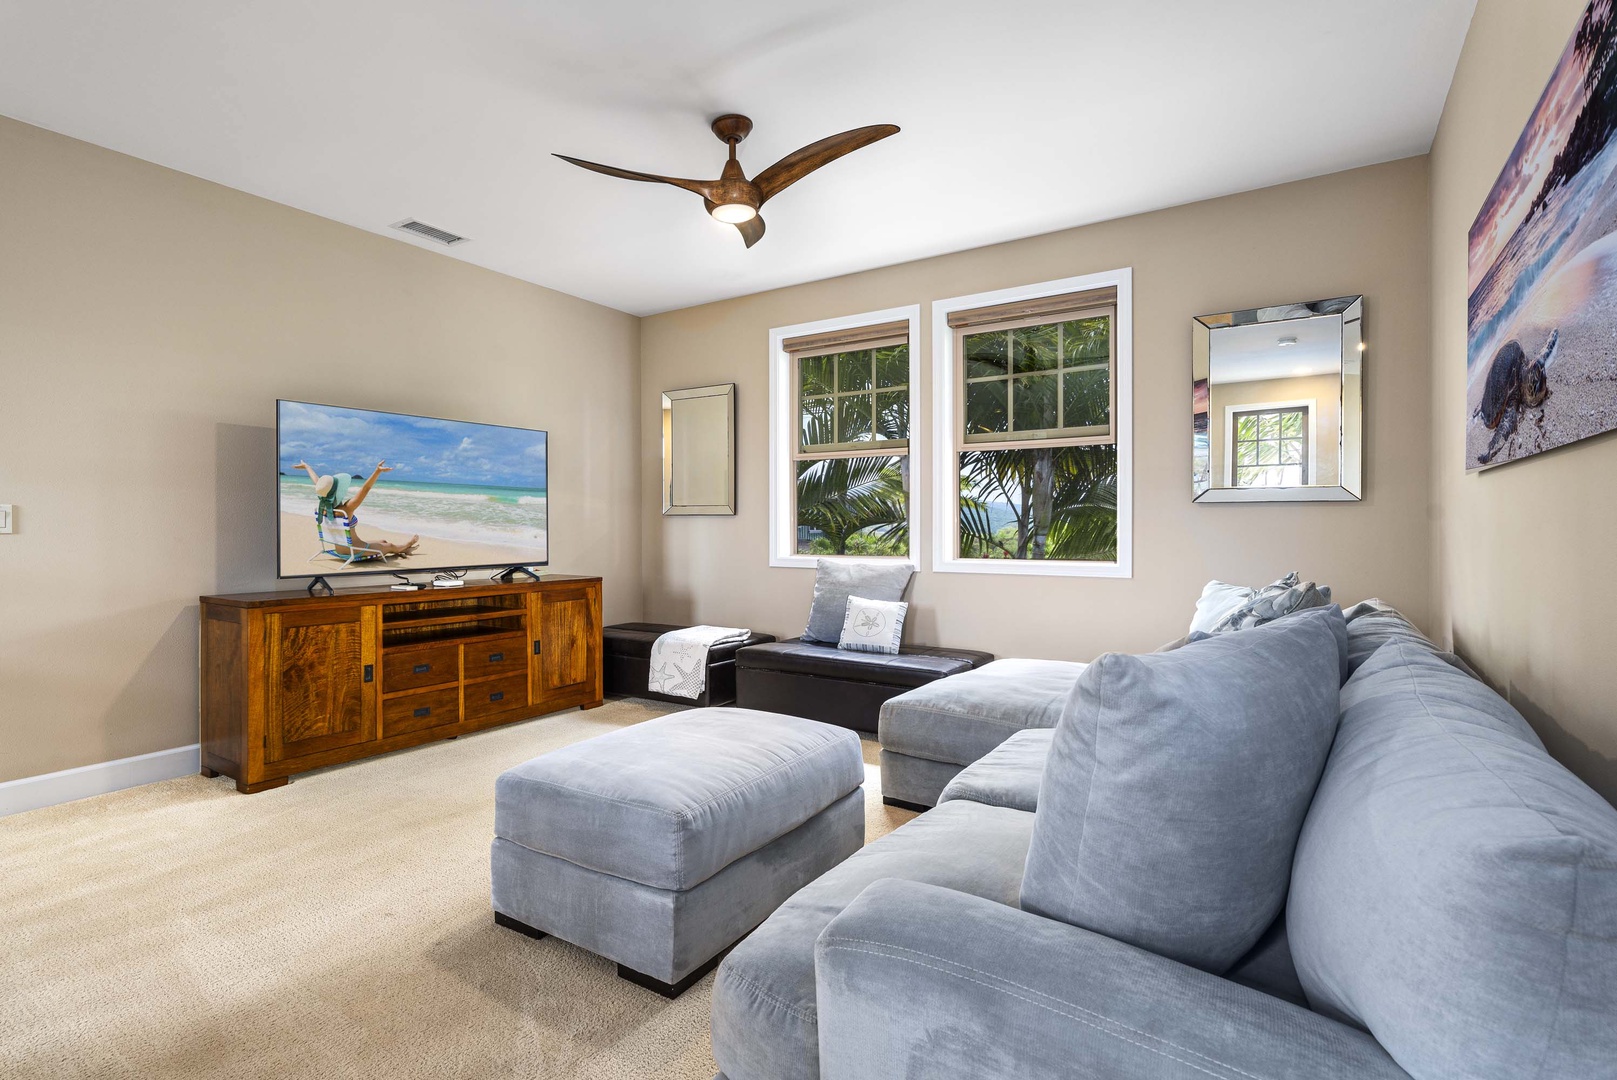 Kailua Kona Vacation Rentals, Holua Kai #20 - Smart TV equipped and perfect for common area slumber party!